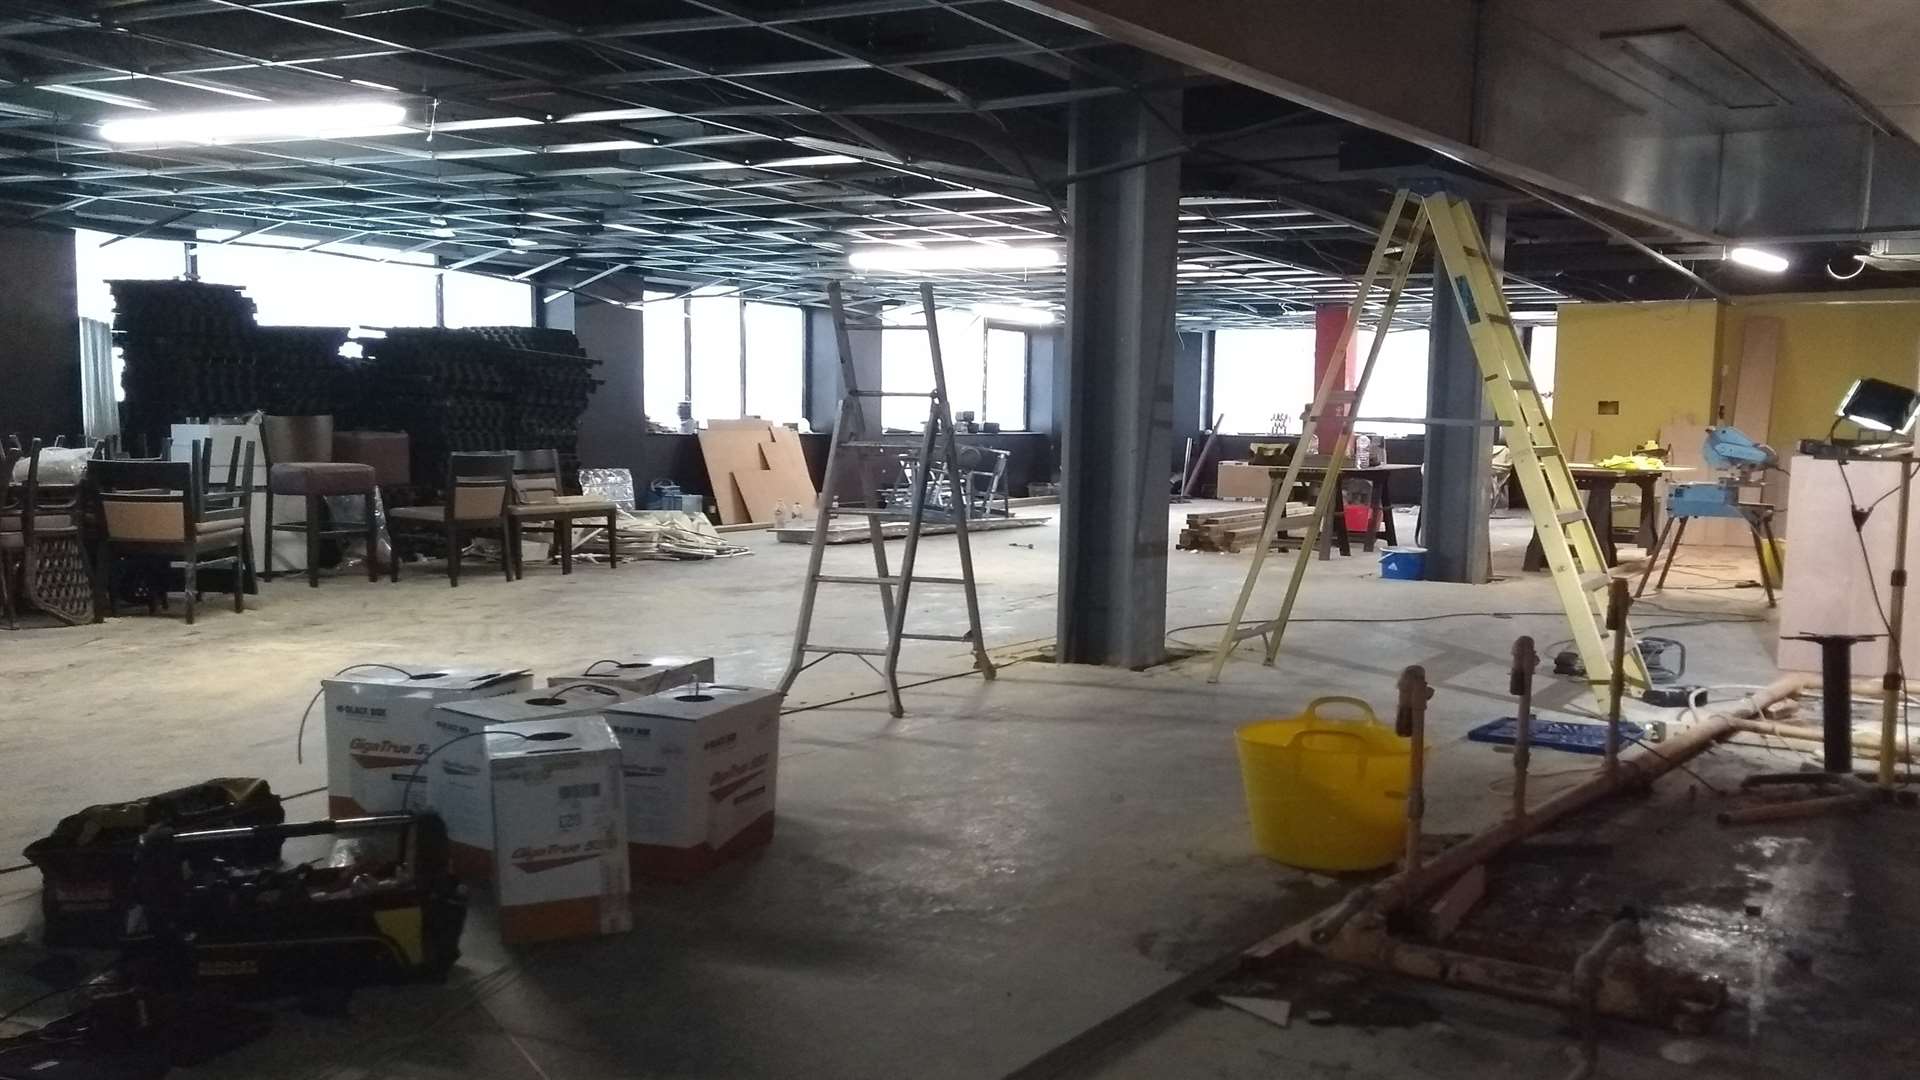 The street-level floor will be a bar and restaurant with a 'pizza shack'